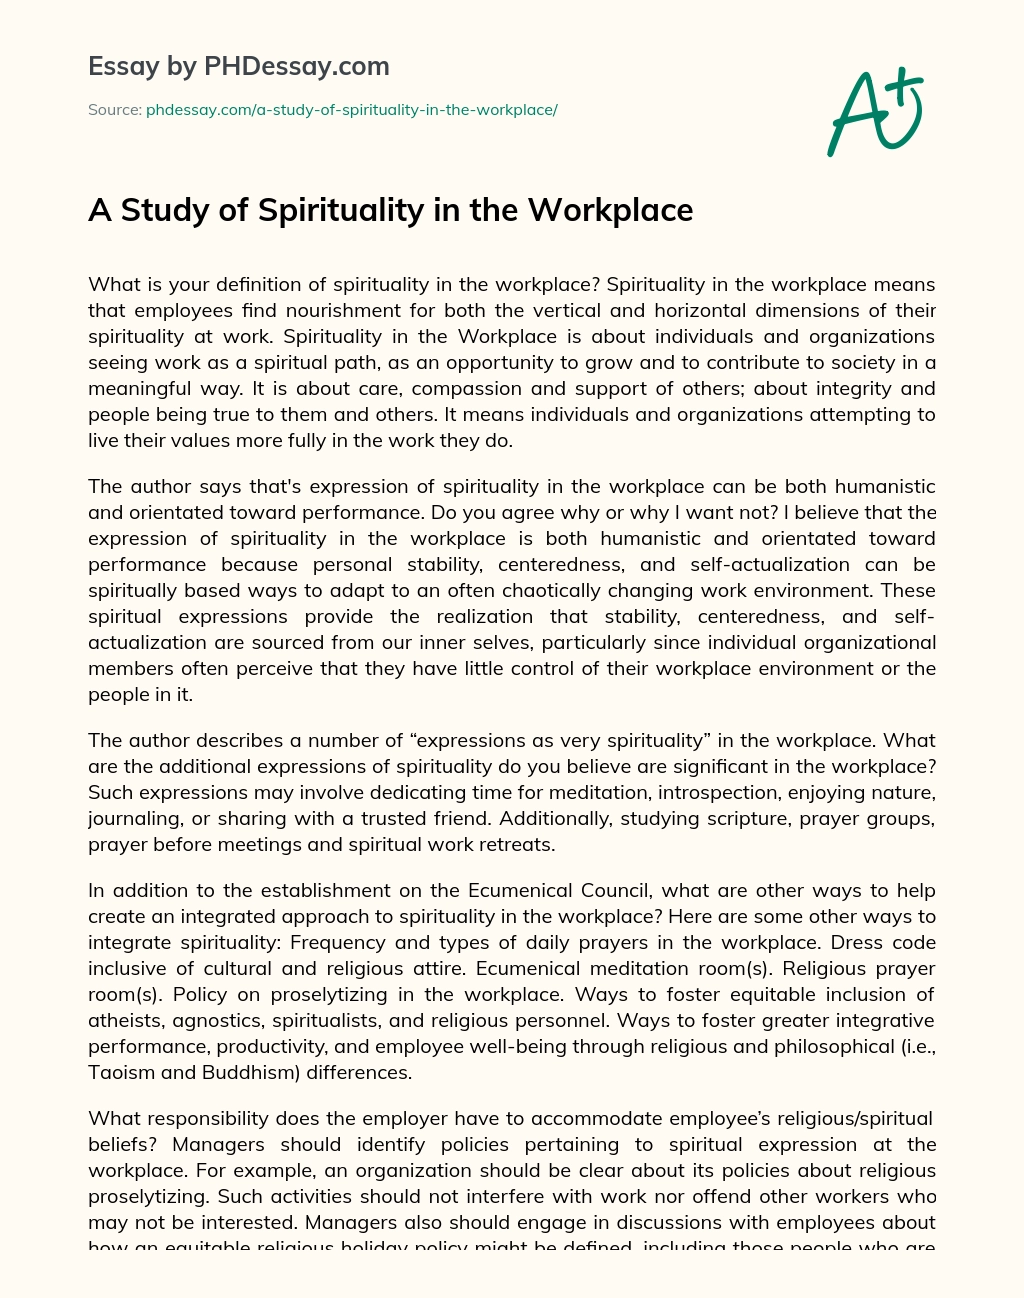 A Study of Spirituality in the Workplace essay